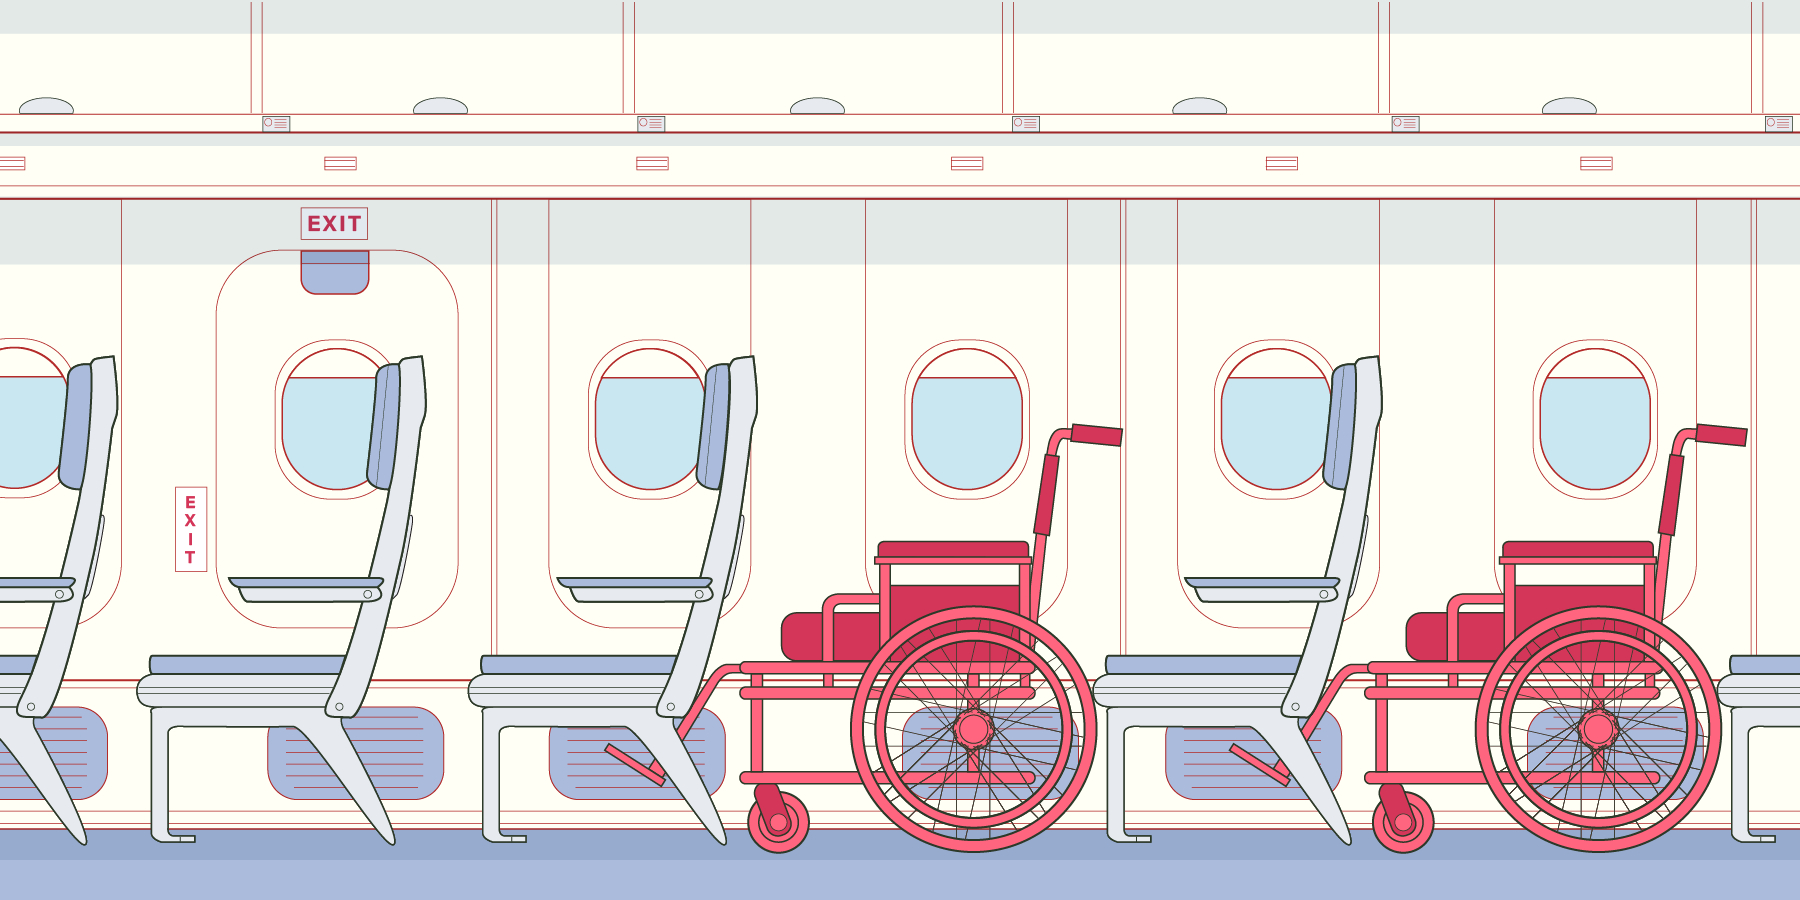 Rows of airplane seats, some of which are replaced by wheelchairs